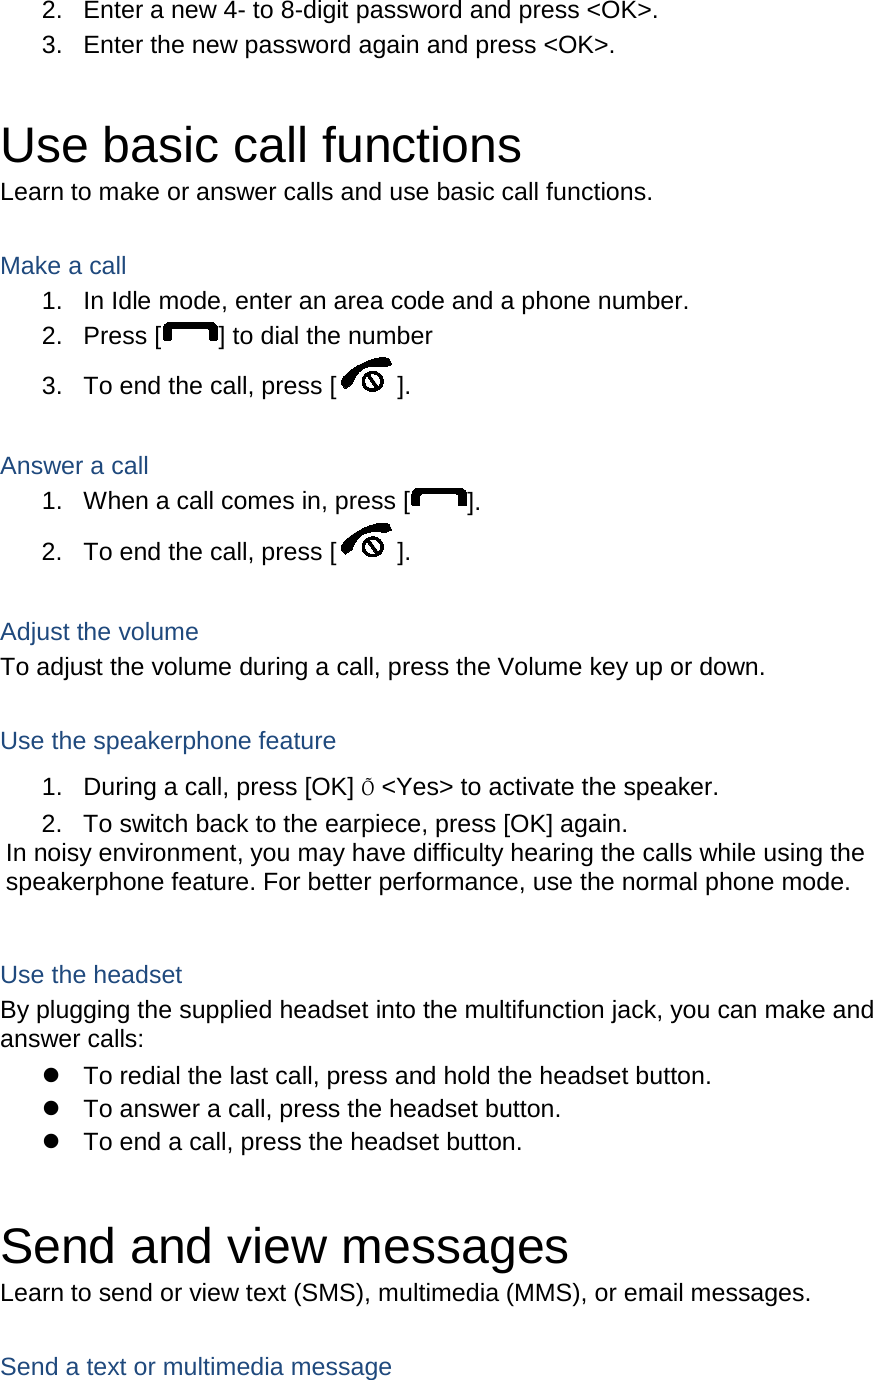 2. Enter a new 4- to 8-digit password and press &lt;OK&gt;. 3. Enter the new password again and press &lt;OK&gt;.  Use basic call functions Learn to make or answer calls and use basic call functions.  Make a call 1. In Idle mode, enter an area code and a phone number. 2. Press [ ] to dial the number 3. To end the call, press [ ].    Answer a call 1. When a call comes in, press [ ]. 2. To end the call, press [ ].  Adjust the volume To adjust the volume during a call, press the Volume key up or down.  Use the speakerphone feature 1. During a call, press [OK] Õ &lt;Yes&gt; to activate the speaker. 2. To switch back to the earpiece, press [OK] again. In noisy environment, you may have difficulty hearing the calls while using the speakerphone feature. For better performance, use the normal phone mode.  Use the headset By plugging the supplied headset into the multifunction jack, you can make and answer calls:  To redial the last call, press and hold the headset button.  To answer a call, press the headset button.  To end a call, press the headset button.  Send and view messages Learn to send or view text (SMS), multimedia (MMS), or email messages.  Send a text or multimedia message 